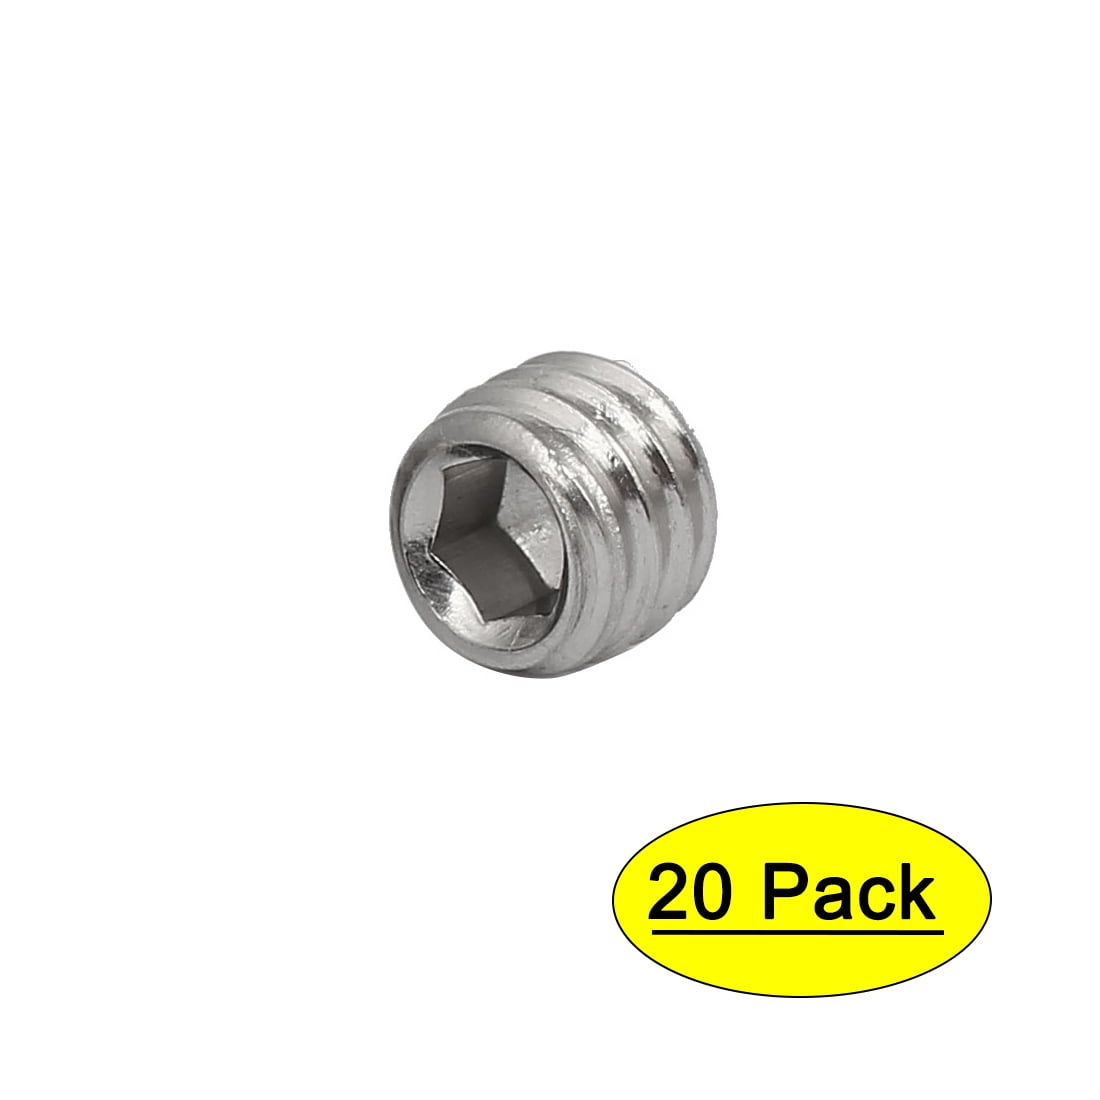 M5 GRUB SCREWS A2 Stainless Steel Mixed Pack of 25 Assorted 